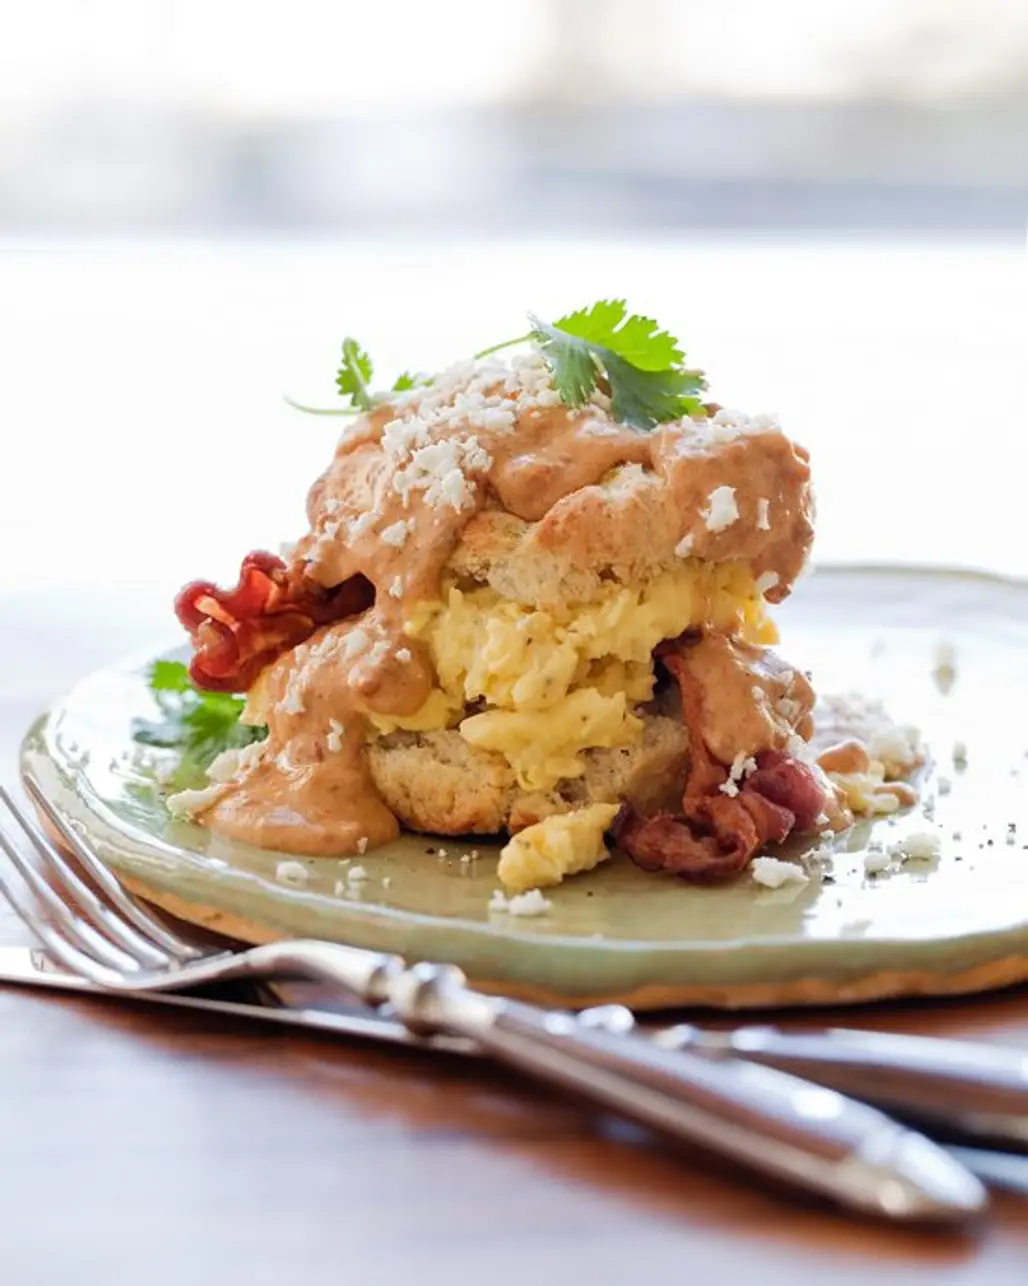 Green Chile Biscuits with Chorizo & Chipotle Gravy